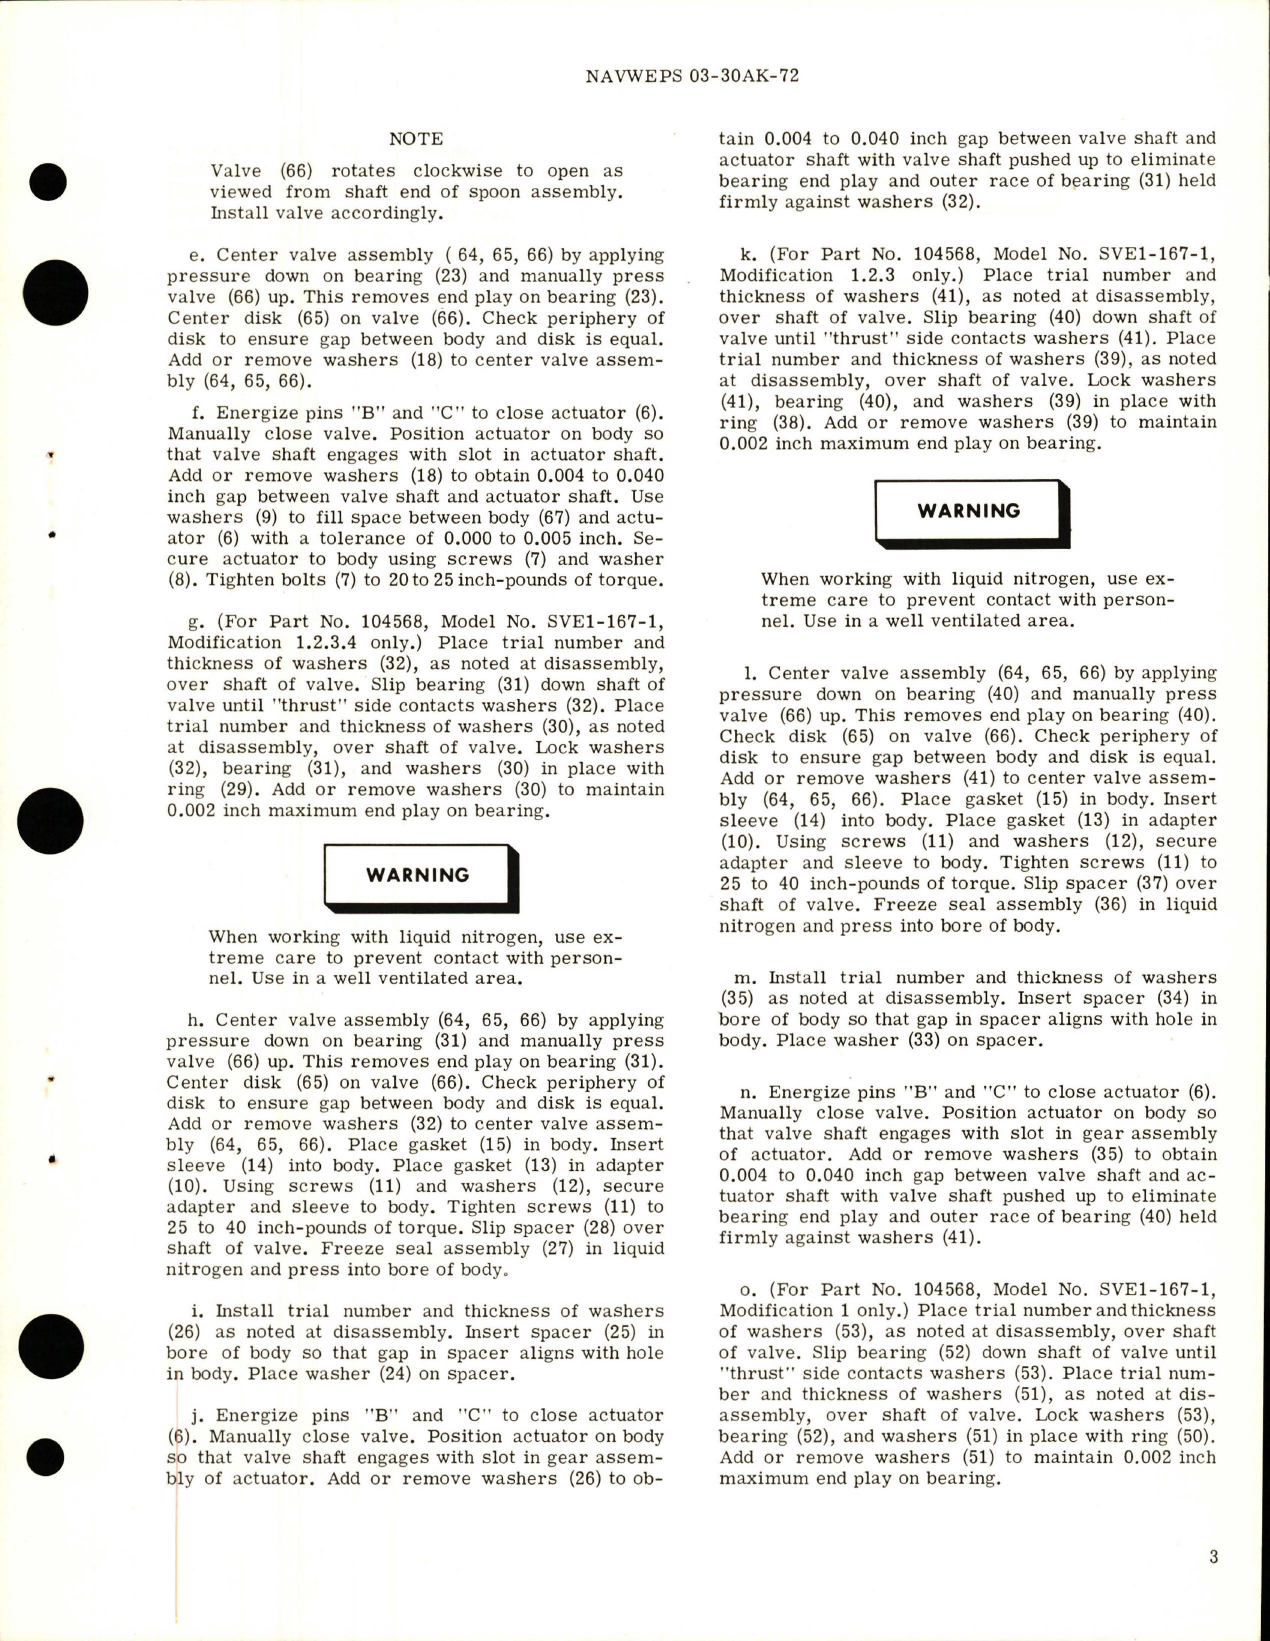 Sample page 5 from AirCorps Library document: Overhaul Instructions with Parts Breakdown for 1